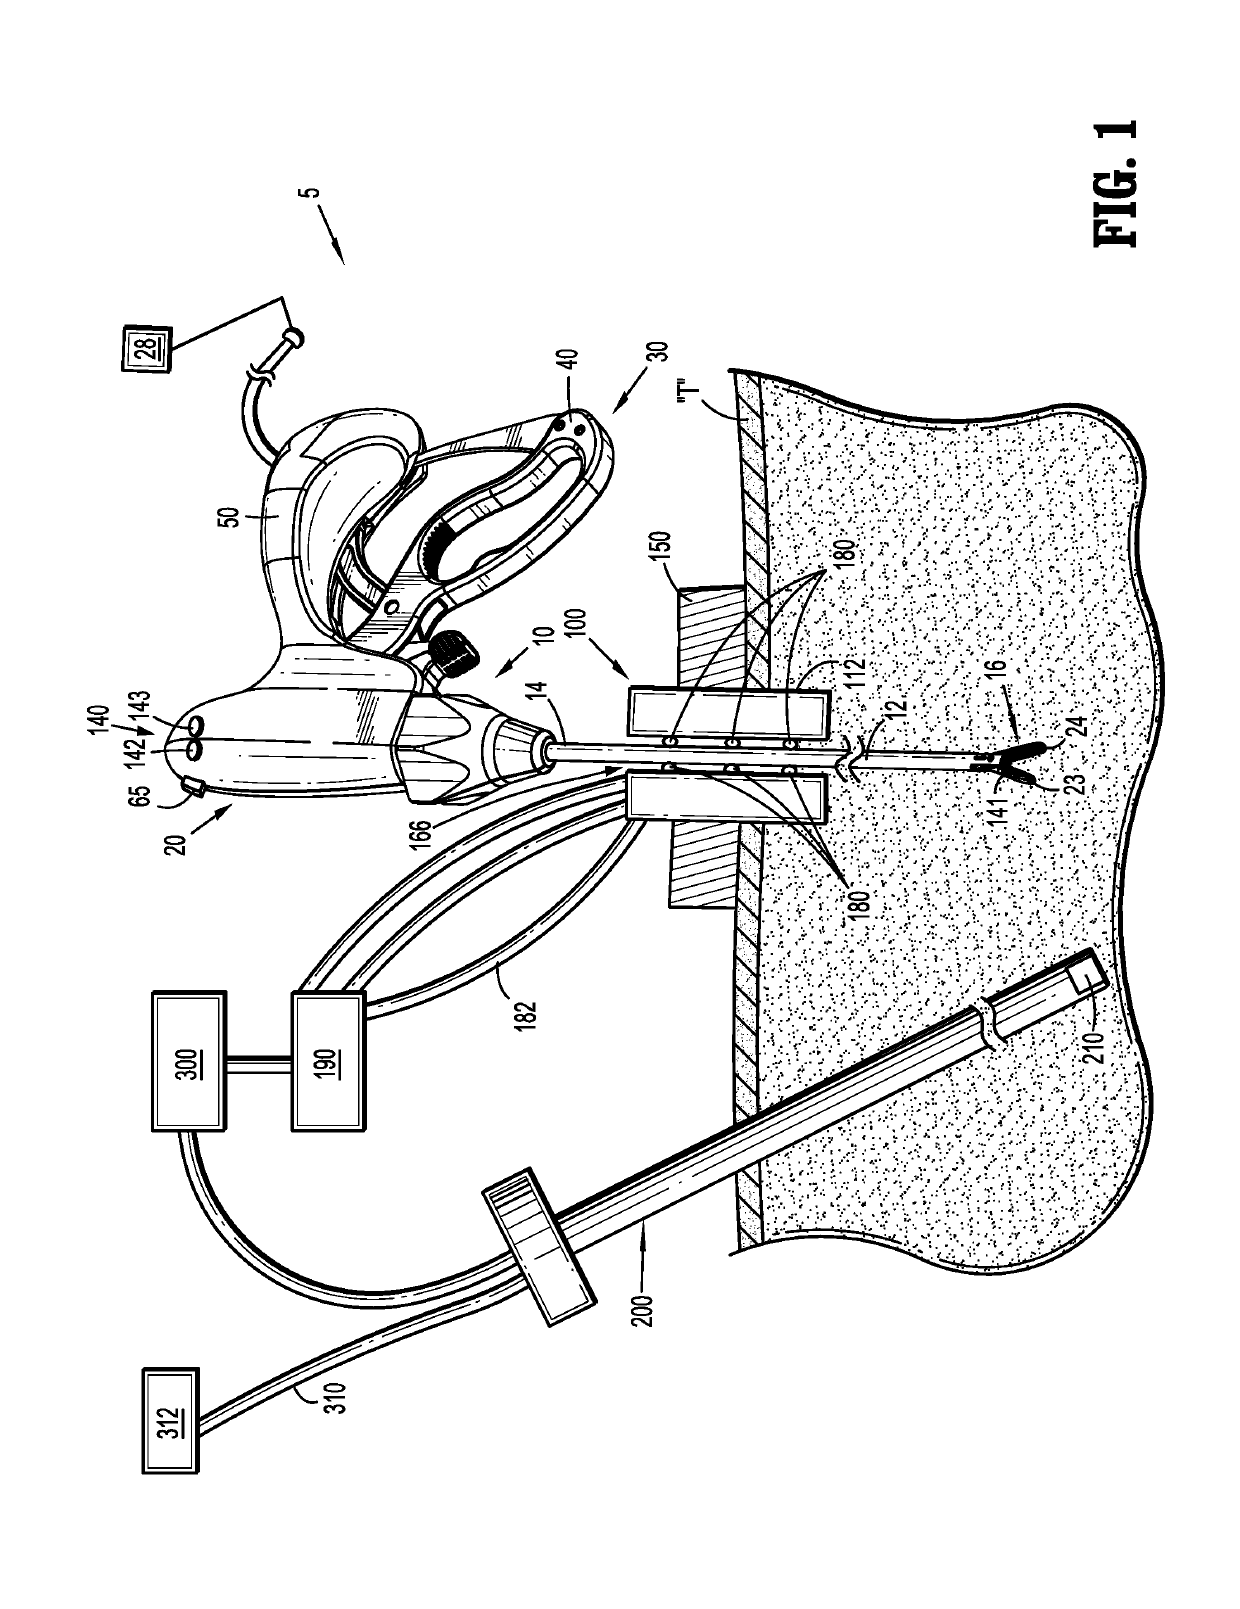 Methods and apparatus for controlling surgical instruments using a surgical port assembly